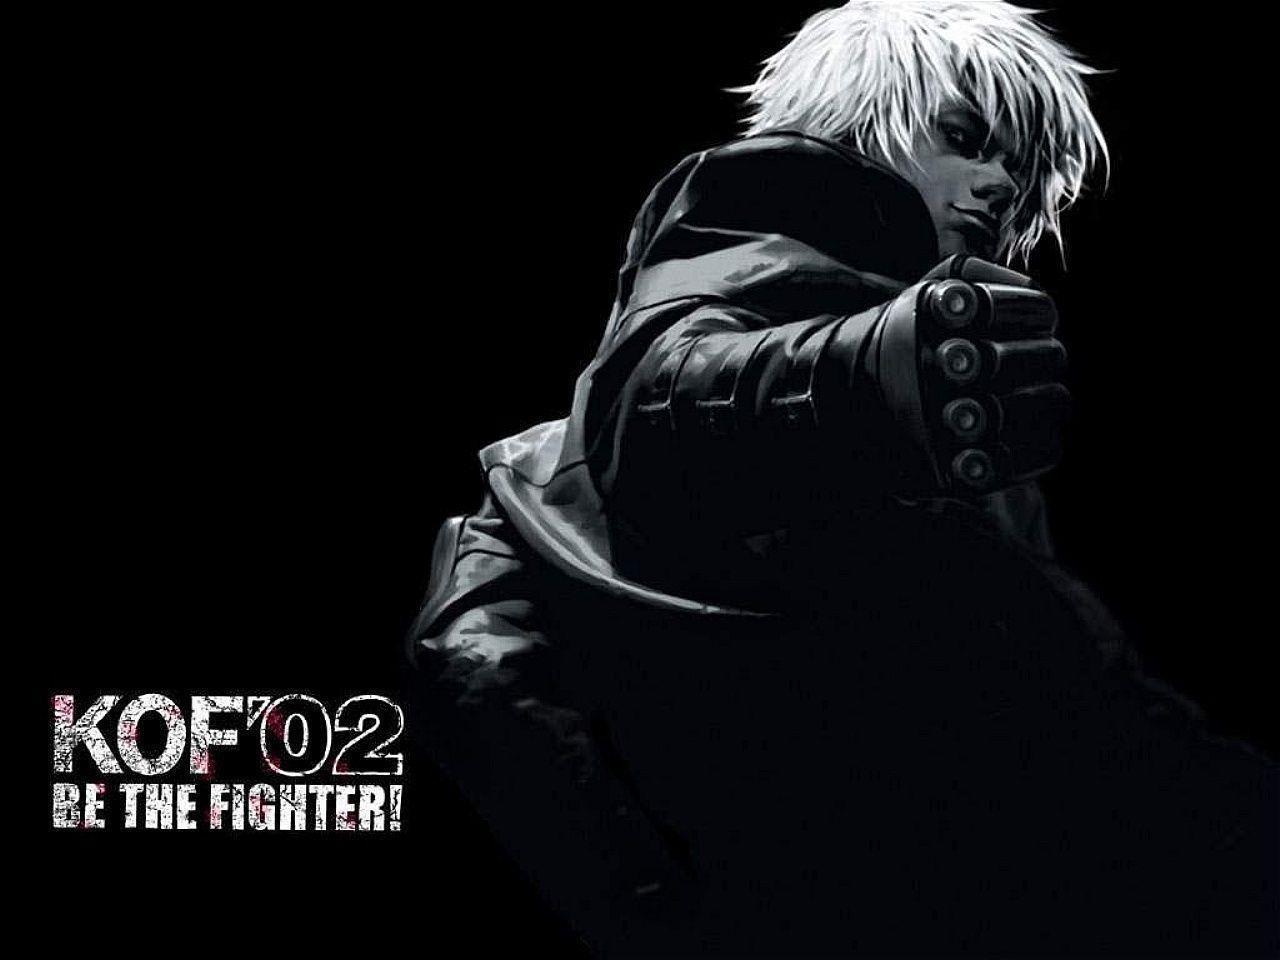 King Of Fighters Wallpapers - Wallpaper Cave